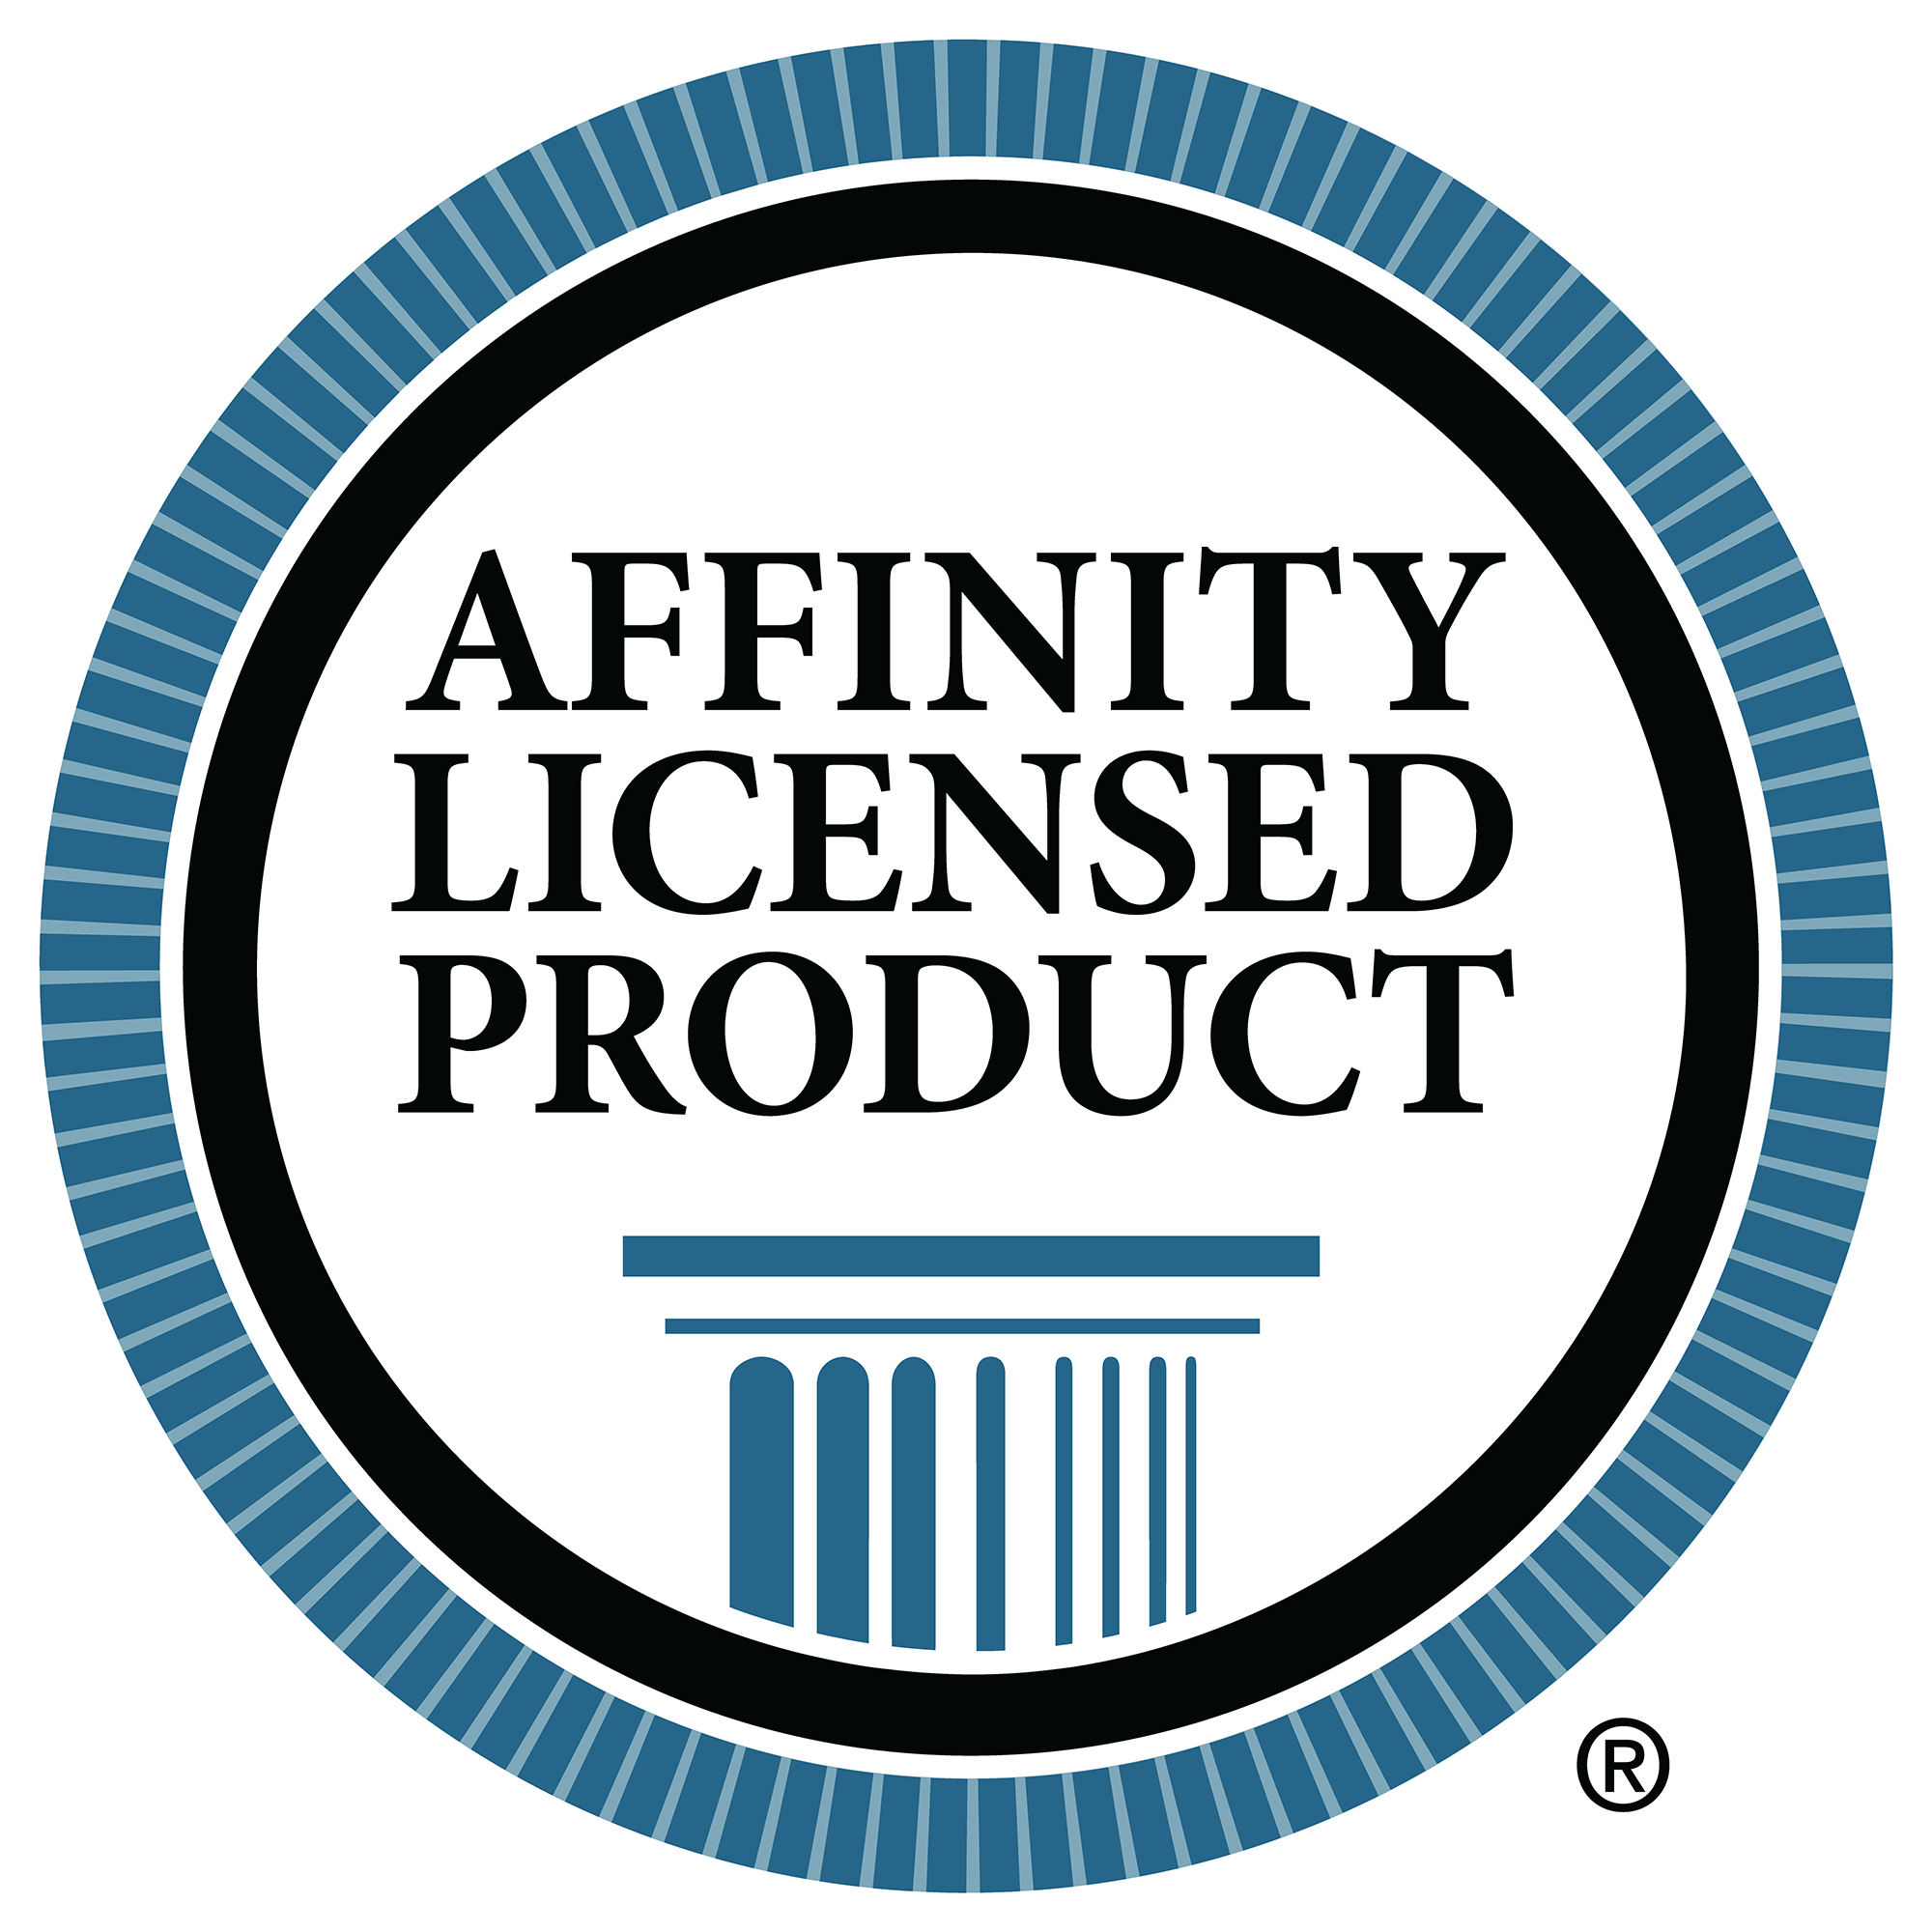 the affinity license product logo